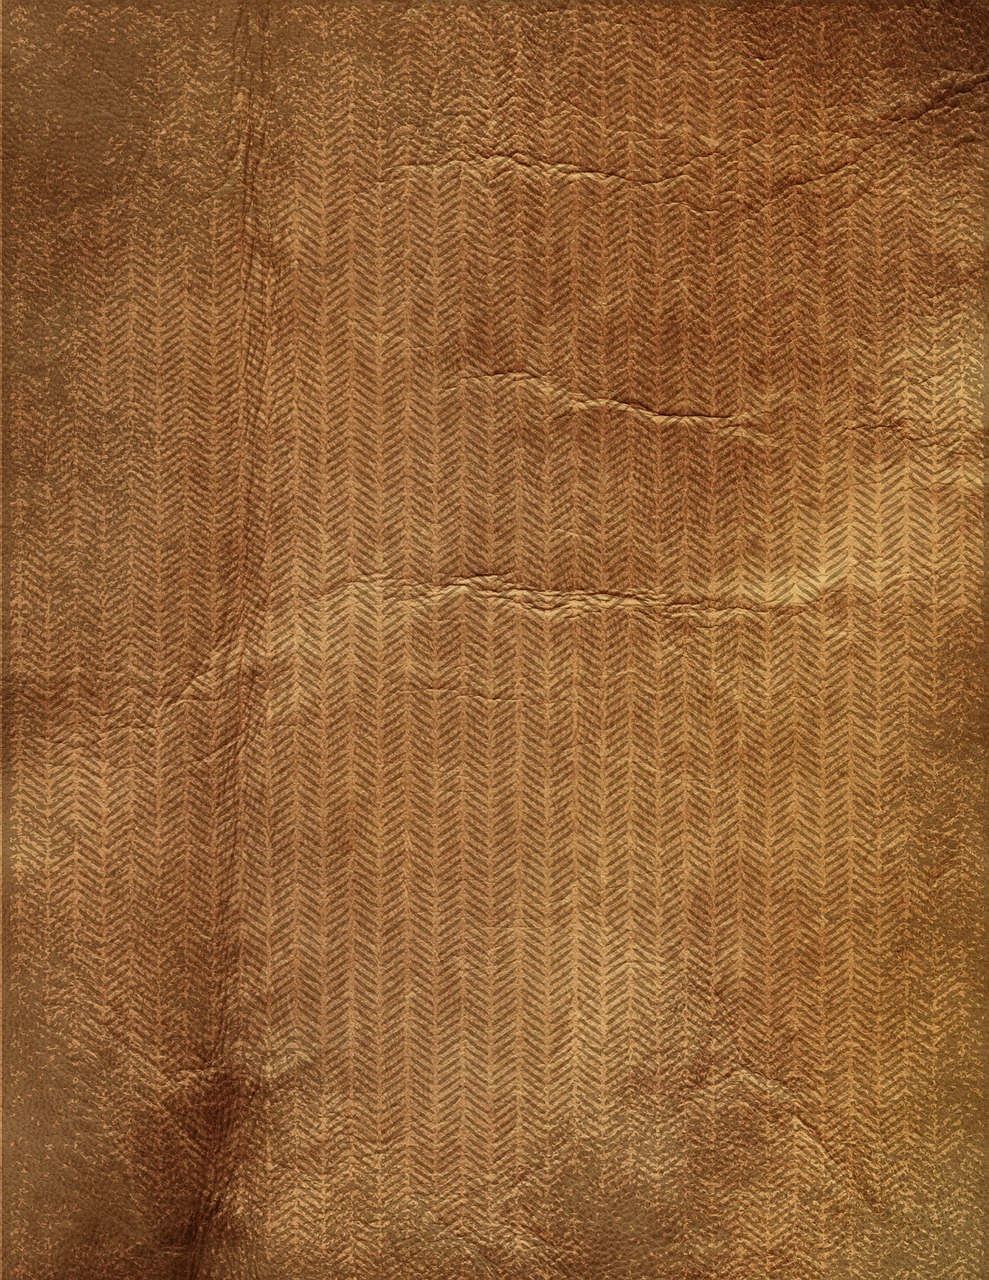 background brown paper free photo